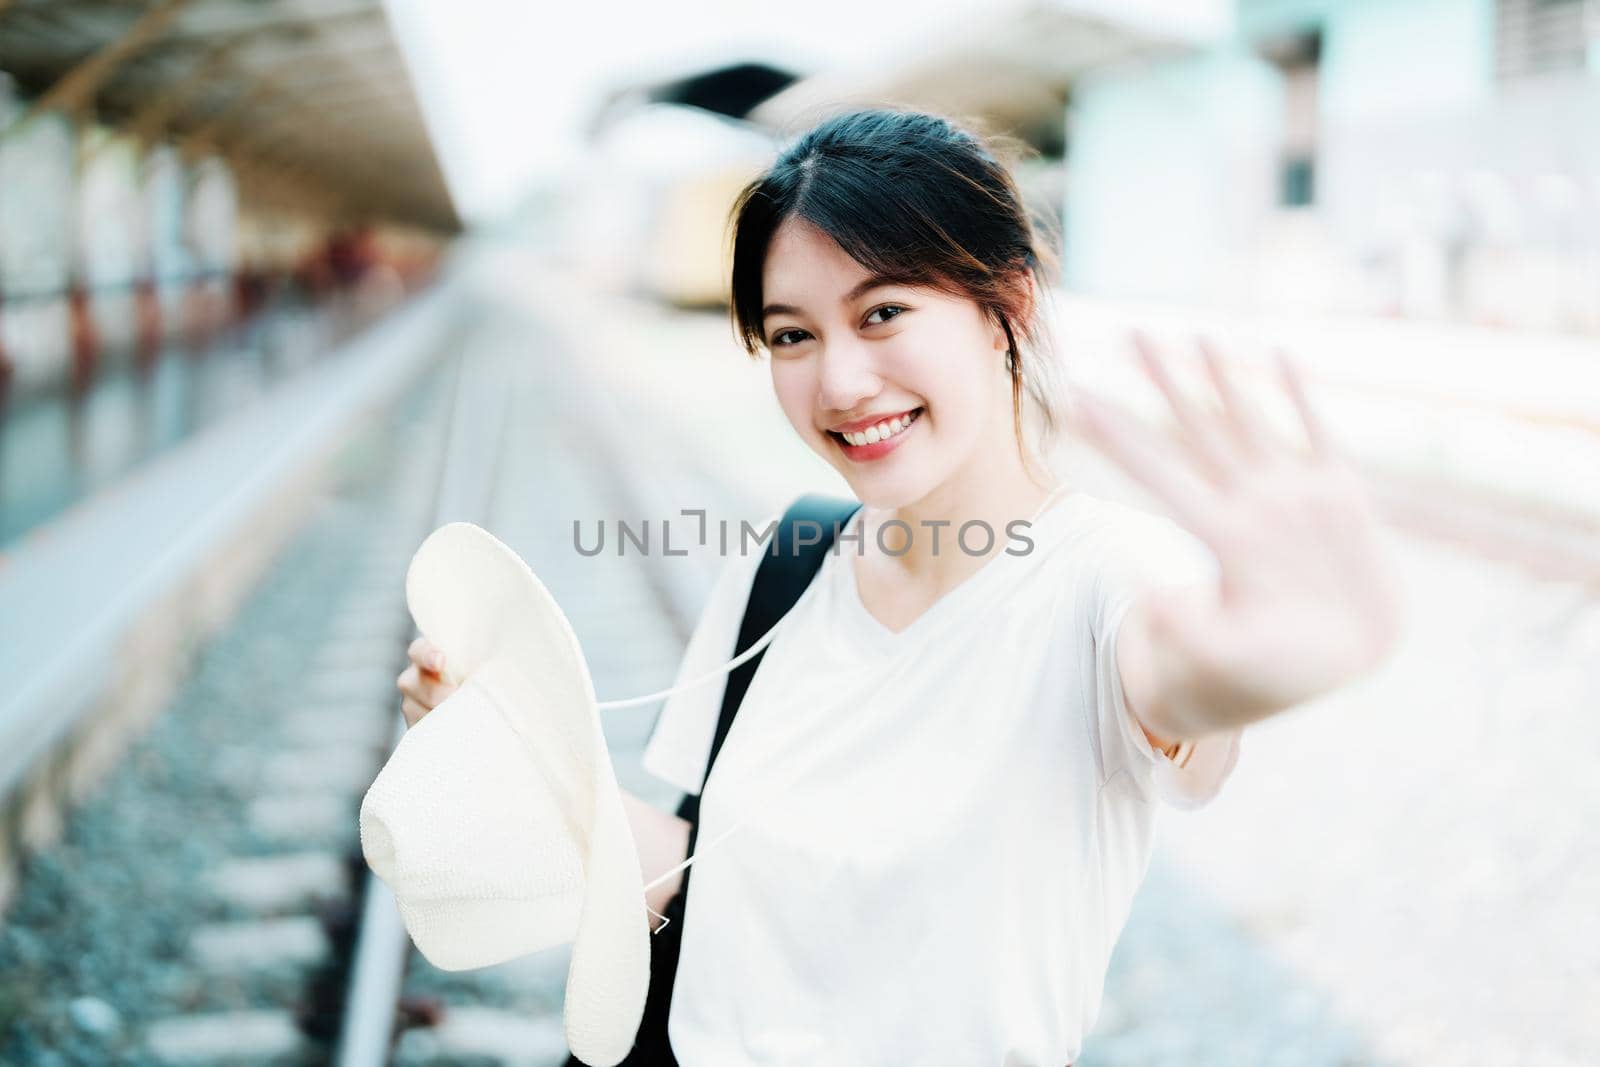 summer, relax, vacation, travel, portrait of cute Asian girl showing smile and showing joy while waiting at the train station for a summer trip